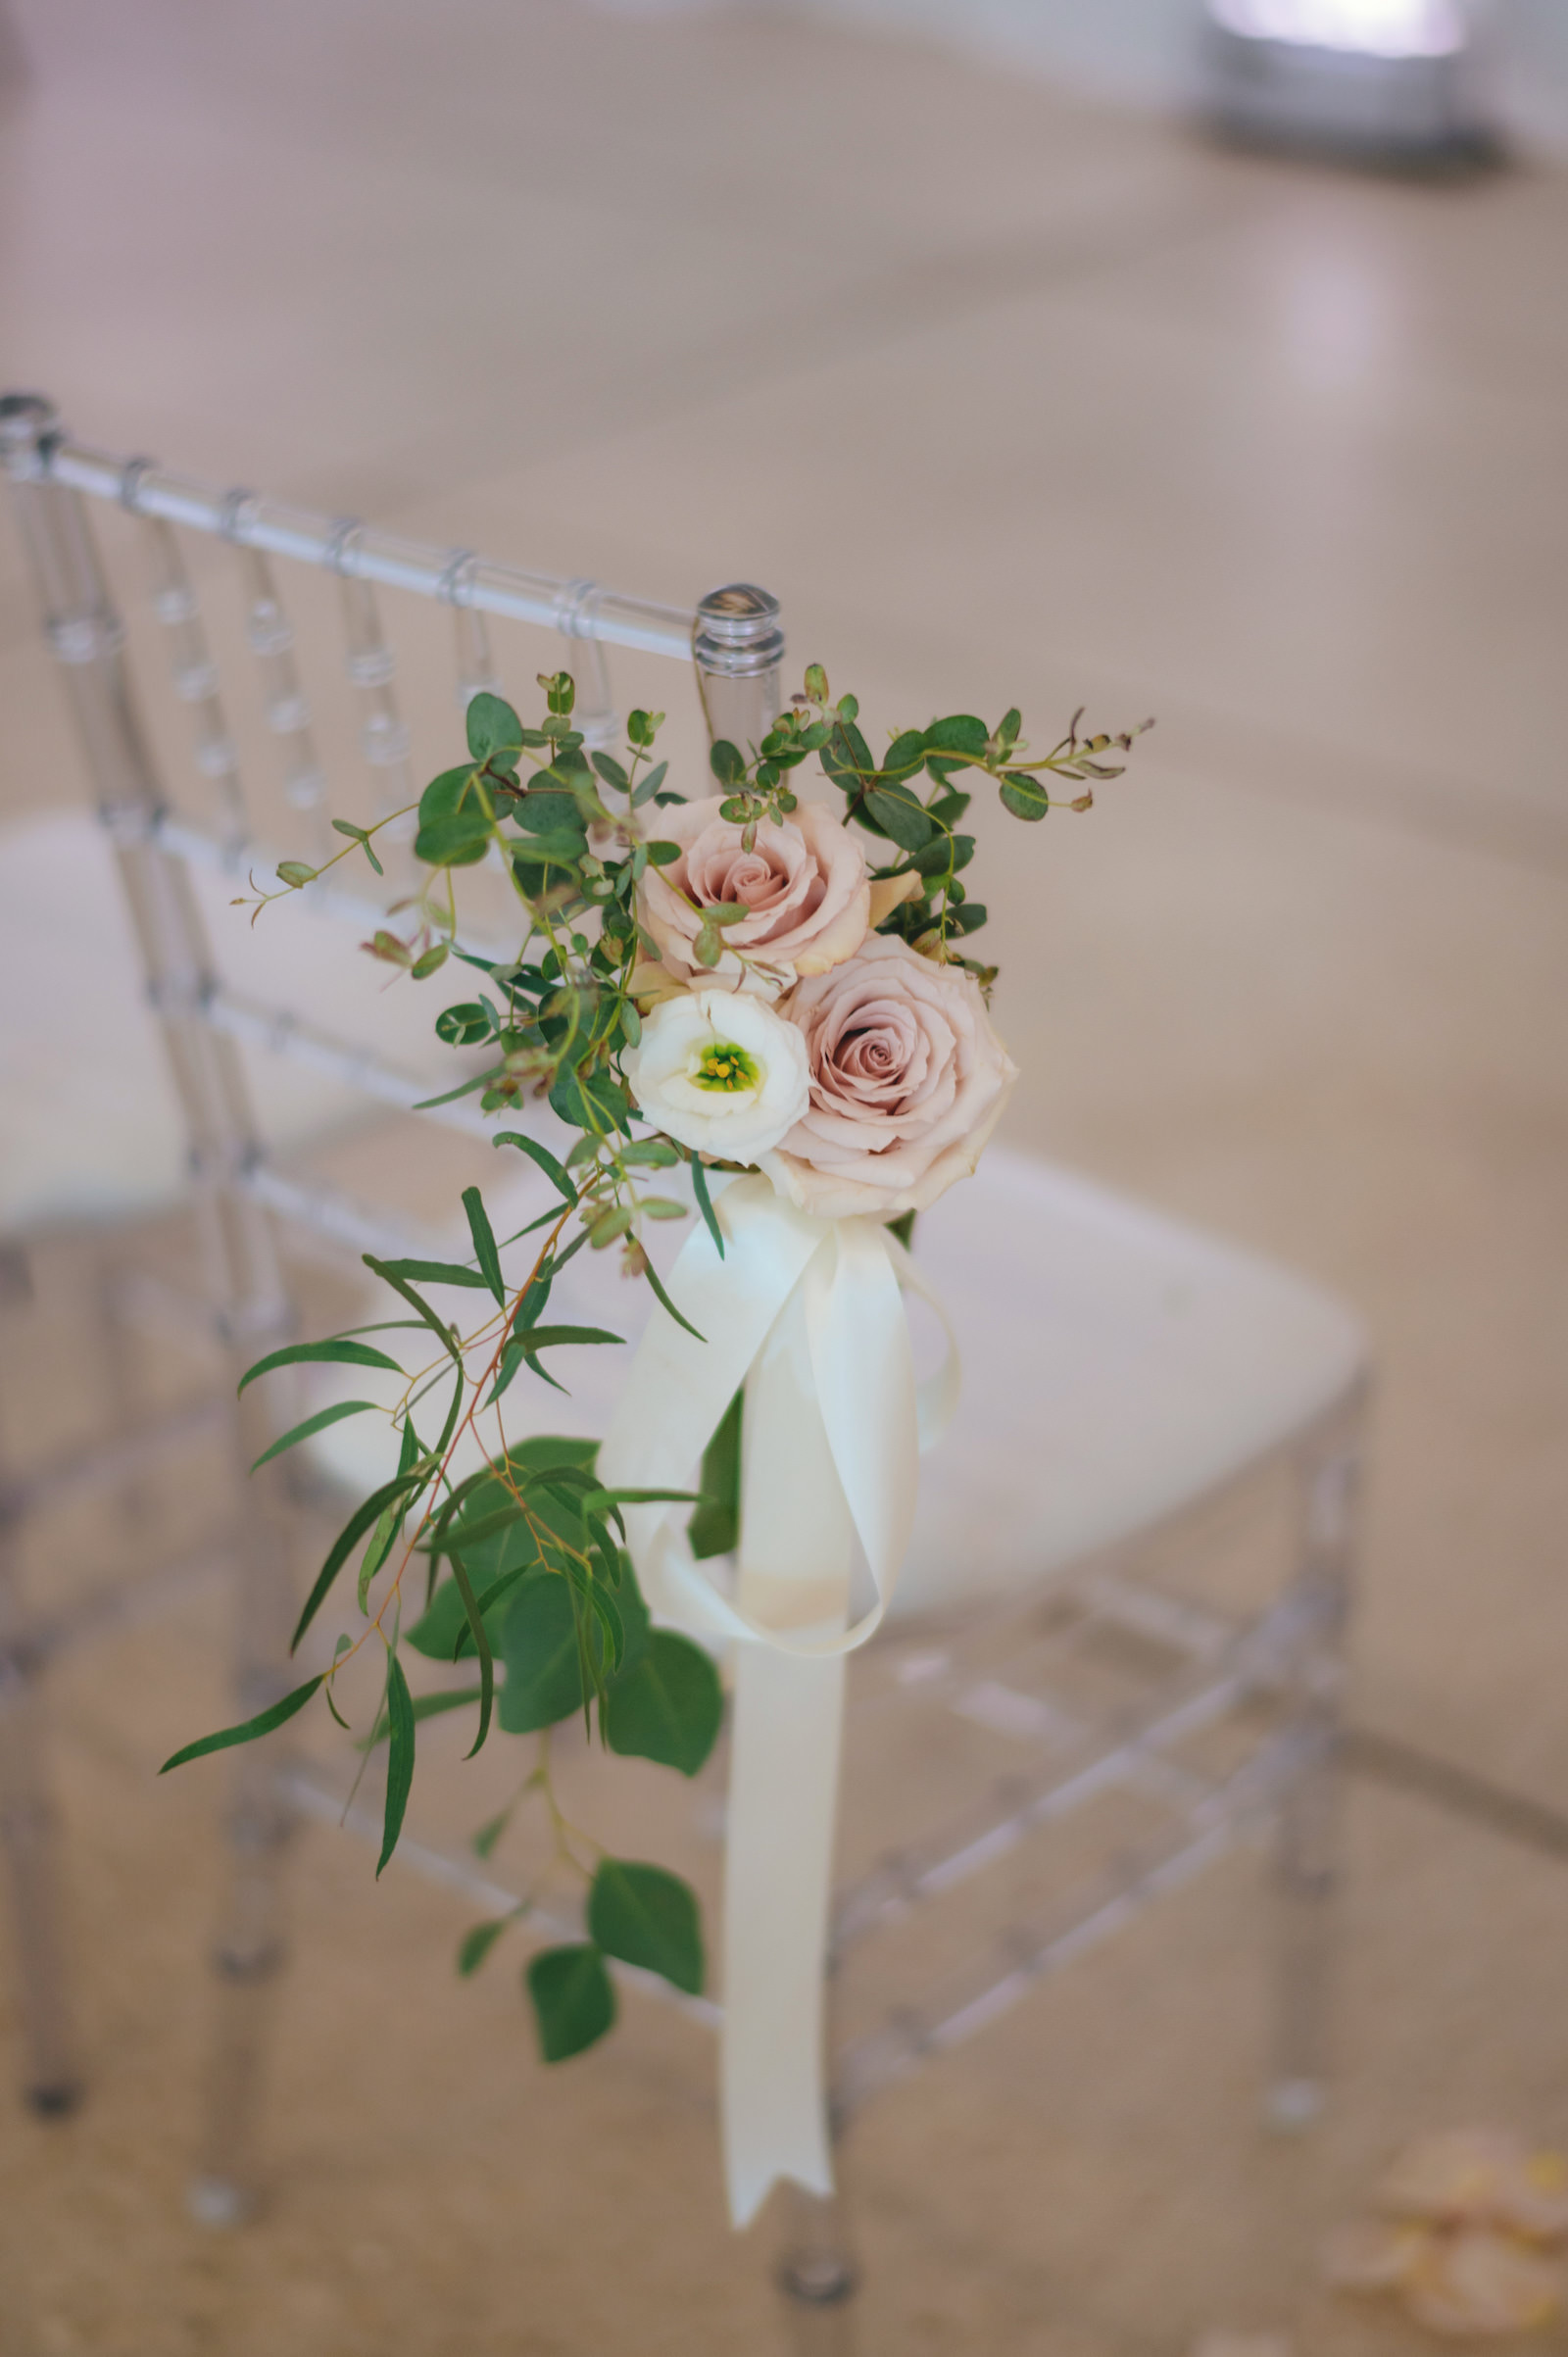 Modern Minimalist Wedding Ceremony Decor, Crystal Chiavari Chair with Blush Pink and White Rose with Greenery Floral Arrangement | Tampa Bay Wedding Chair Rental Kate Ryan Event Rentals